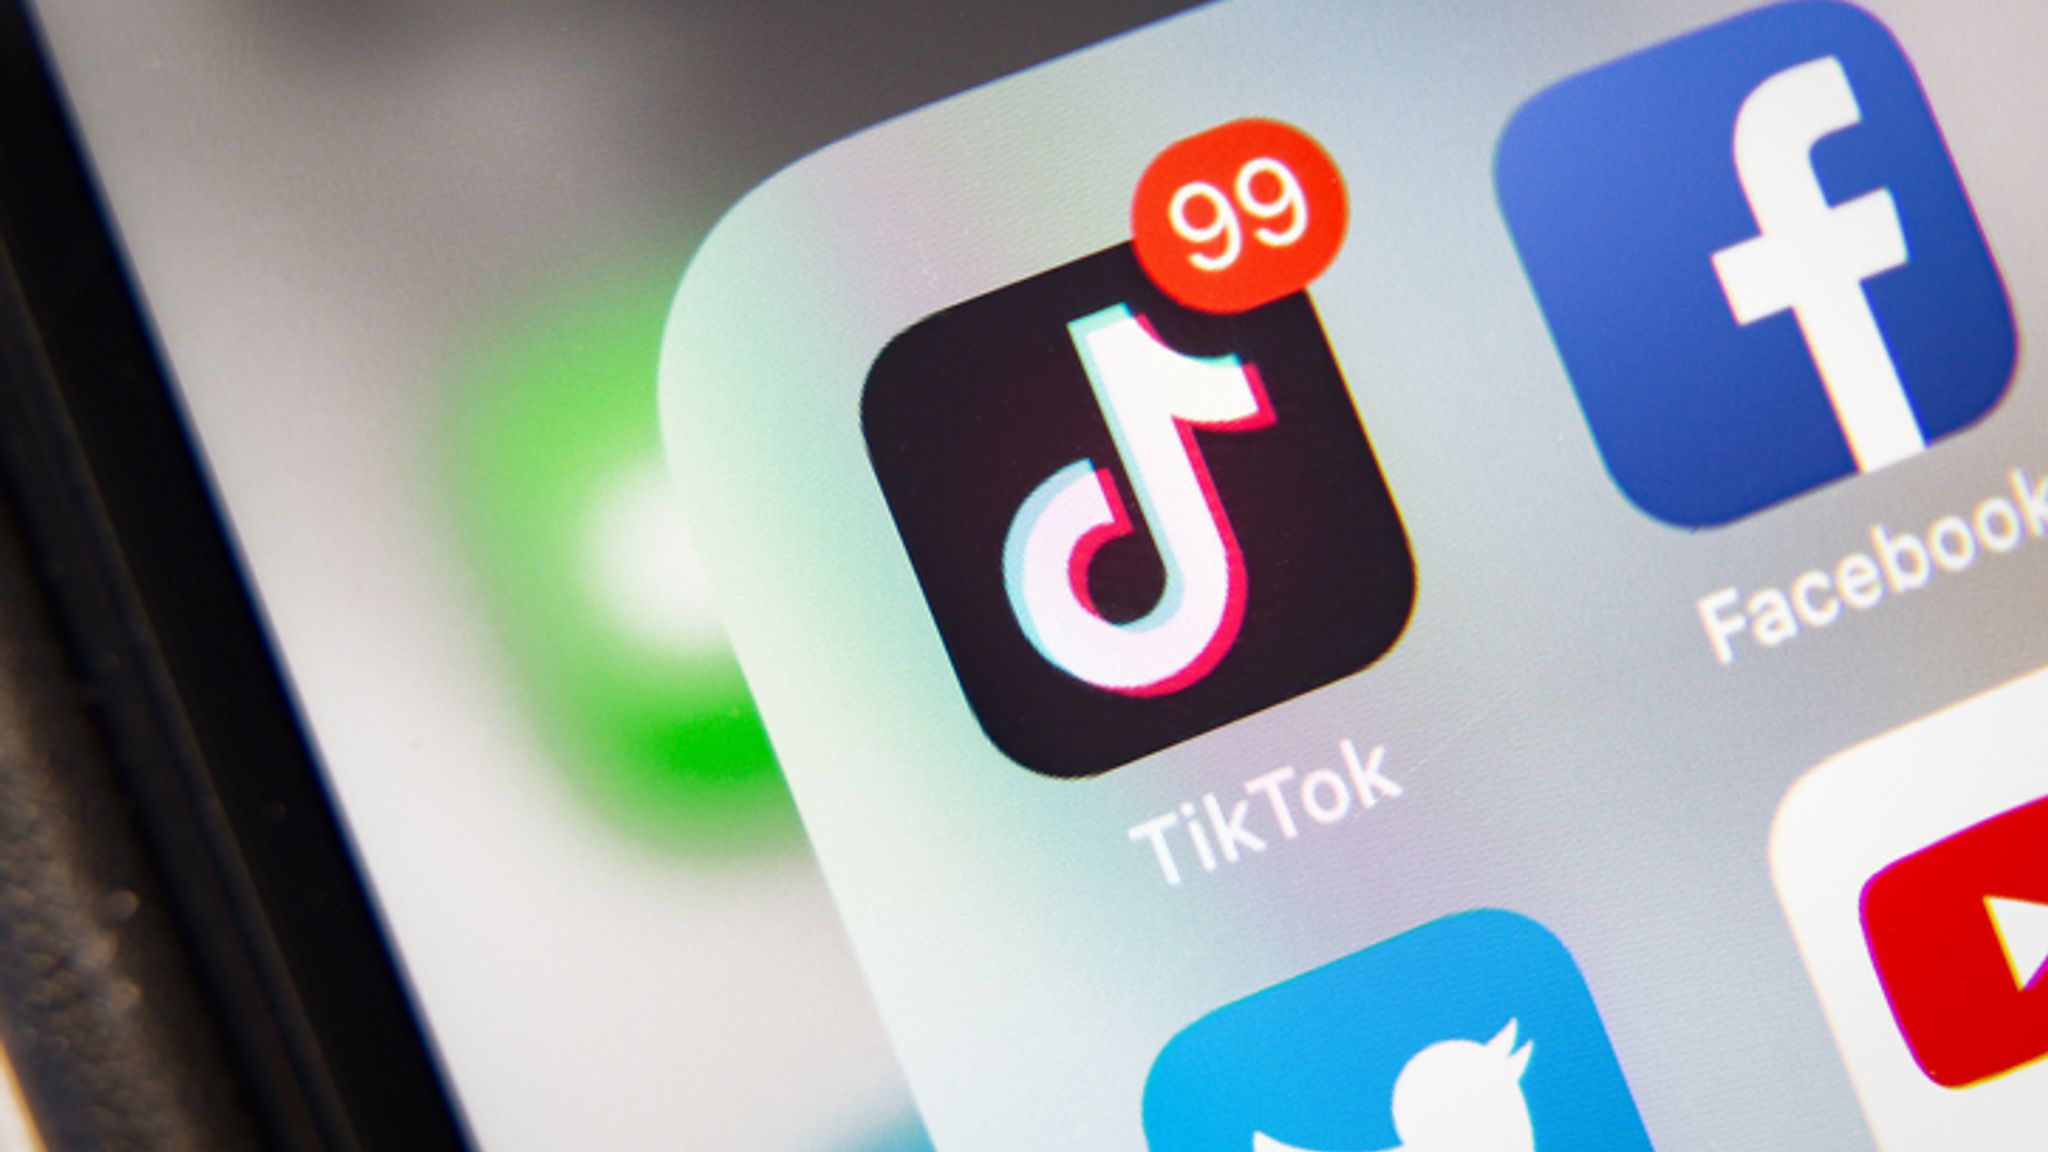 TikTok investigated over alleged transfer of personal data to China and child safety